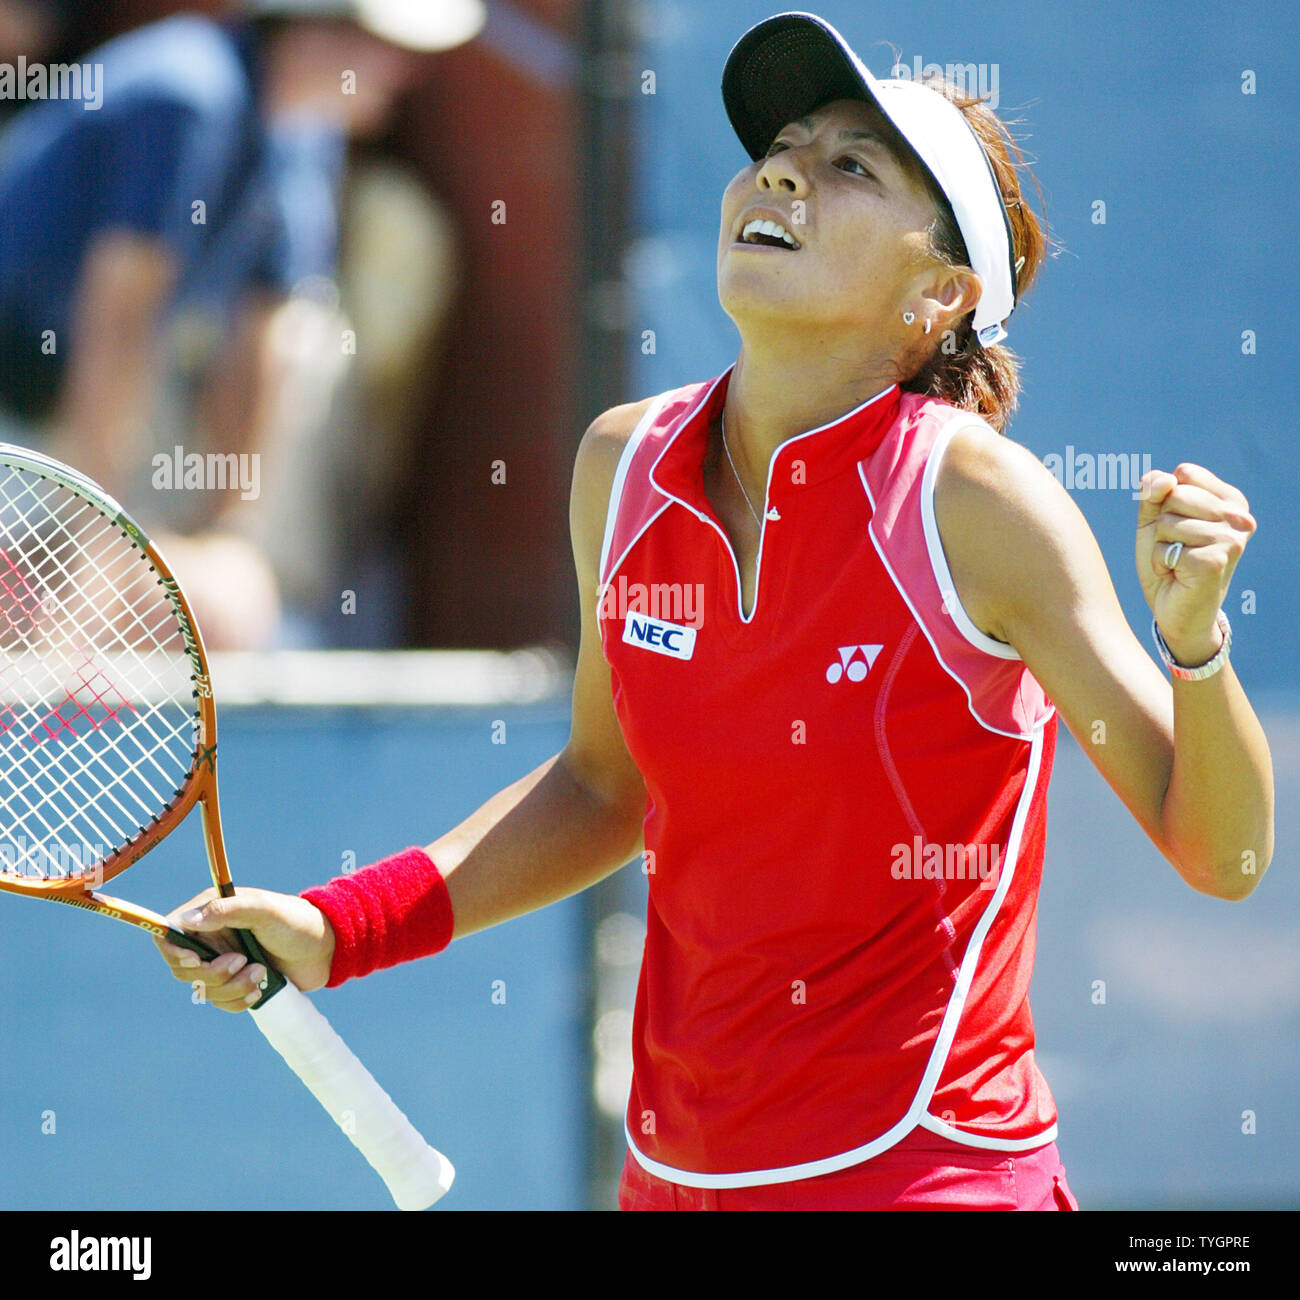 Shinobu Asagoe (JPN) reacts after match point in her straight sets victory overJill Craybas at the US Open in Flushing, New York on September 2, 2004.    (UPI Photo/John Angelillo) Stock Photo